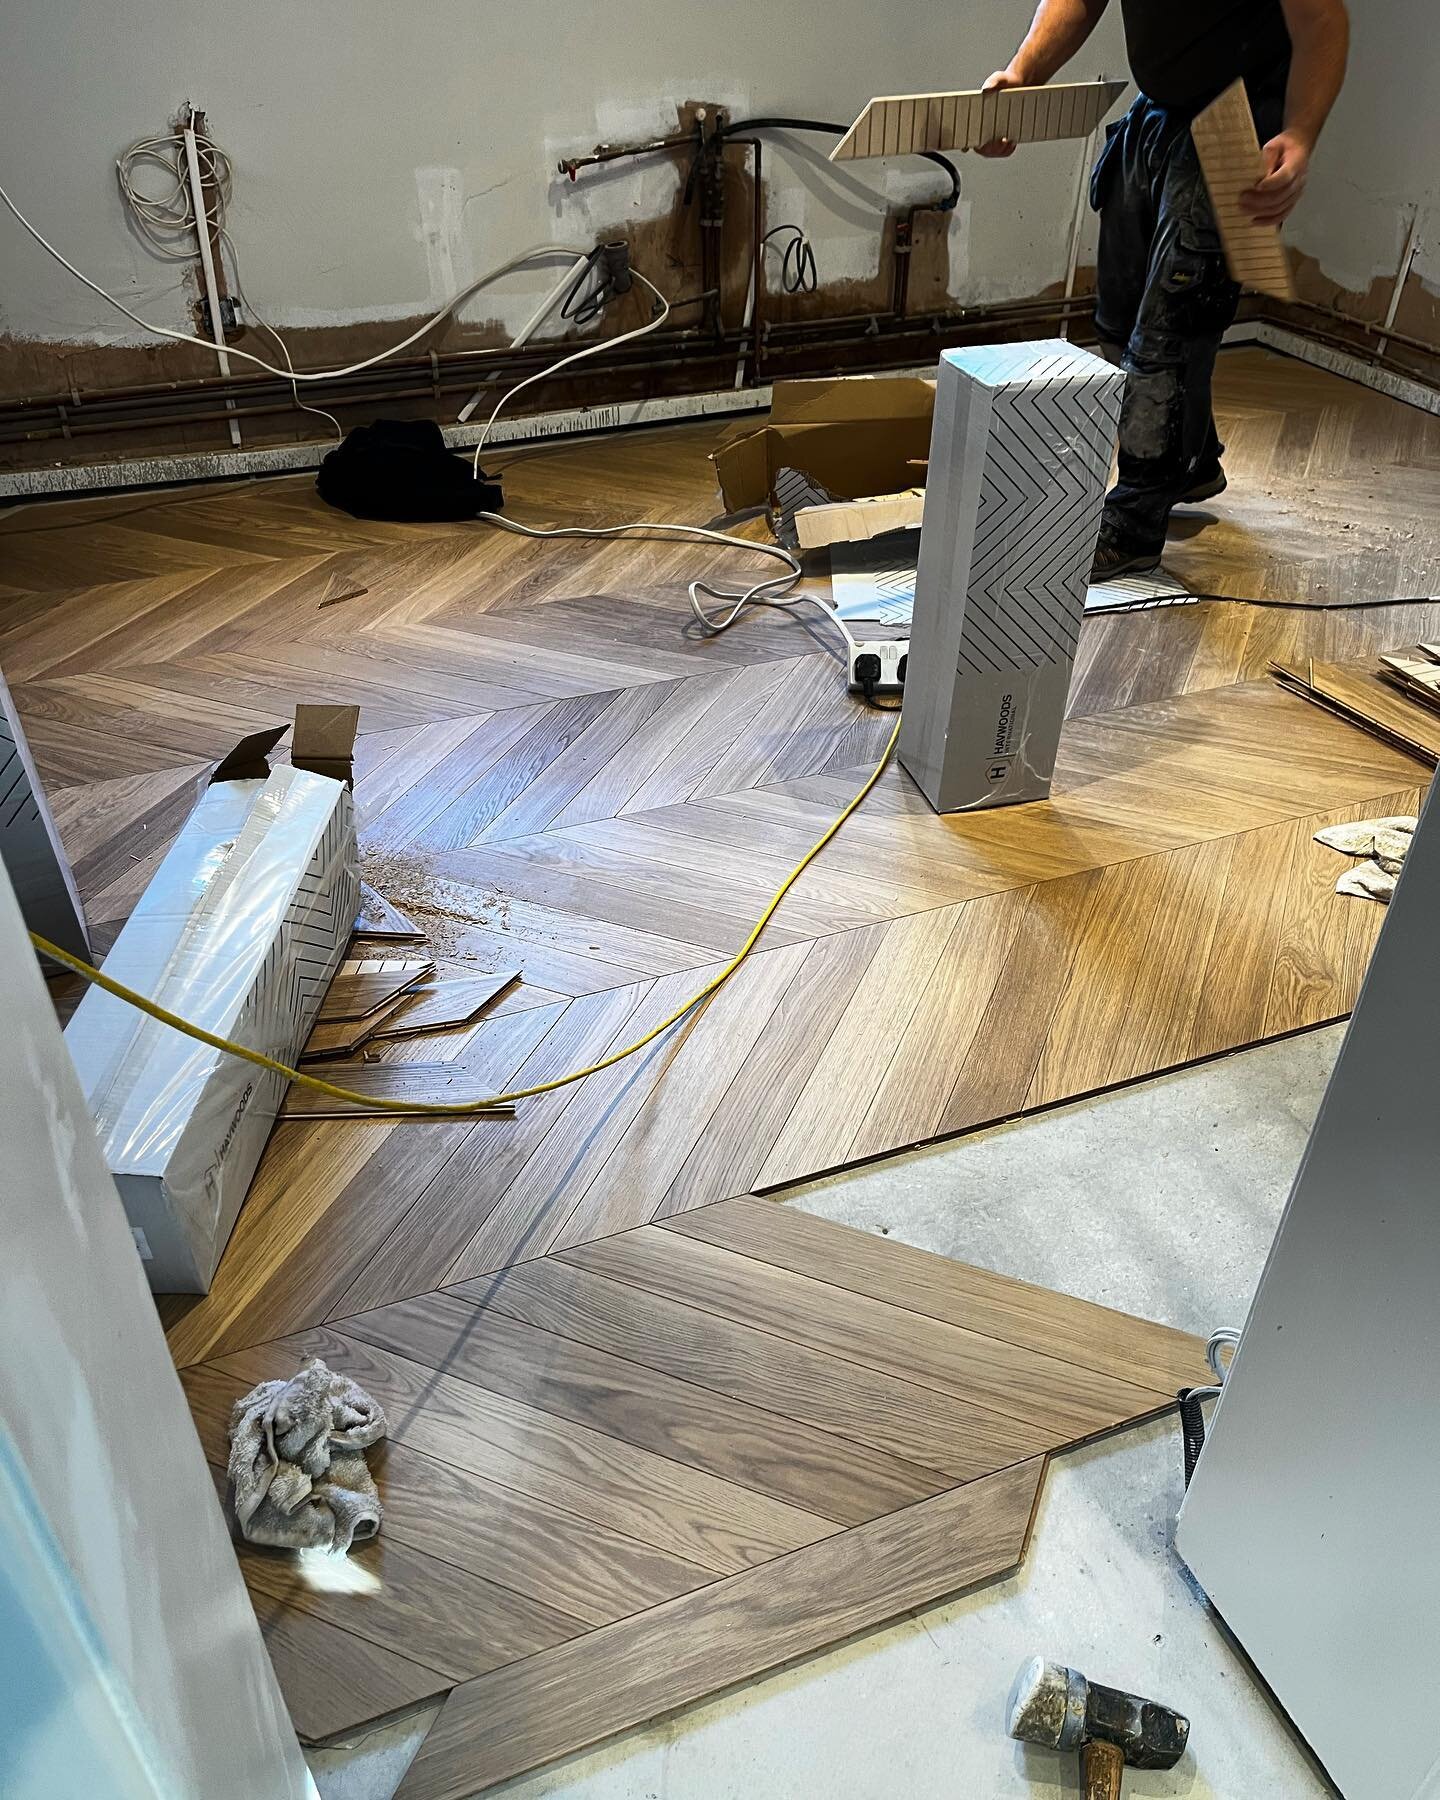 Chevron flooring going down in the Kitchen to our Chiswick project. #kitchen #bigbeanconstruction #build #interiordesign #design #flooring #wood #beautiful #london